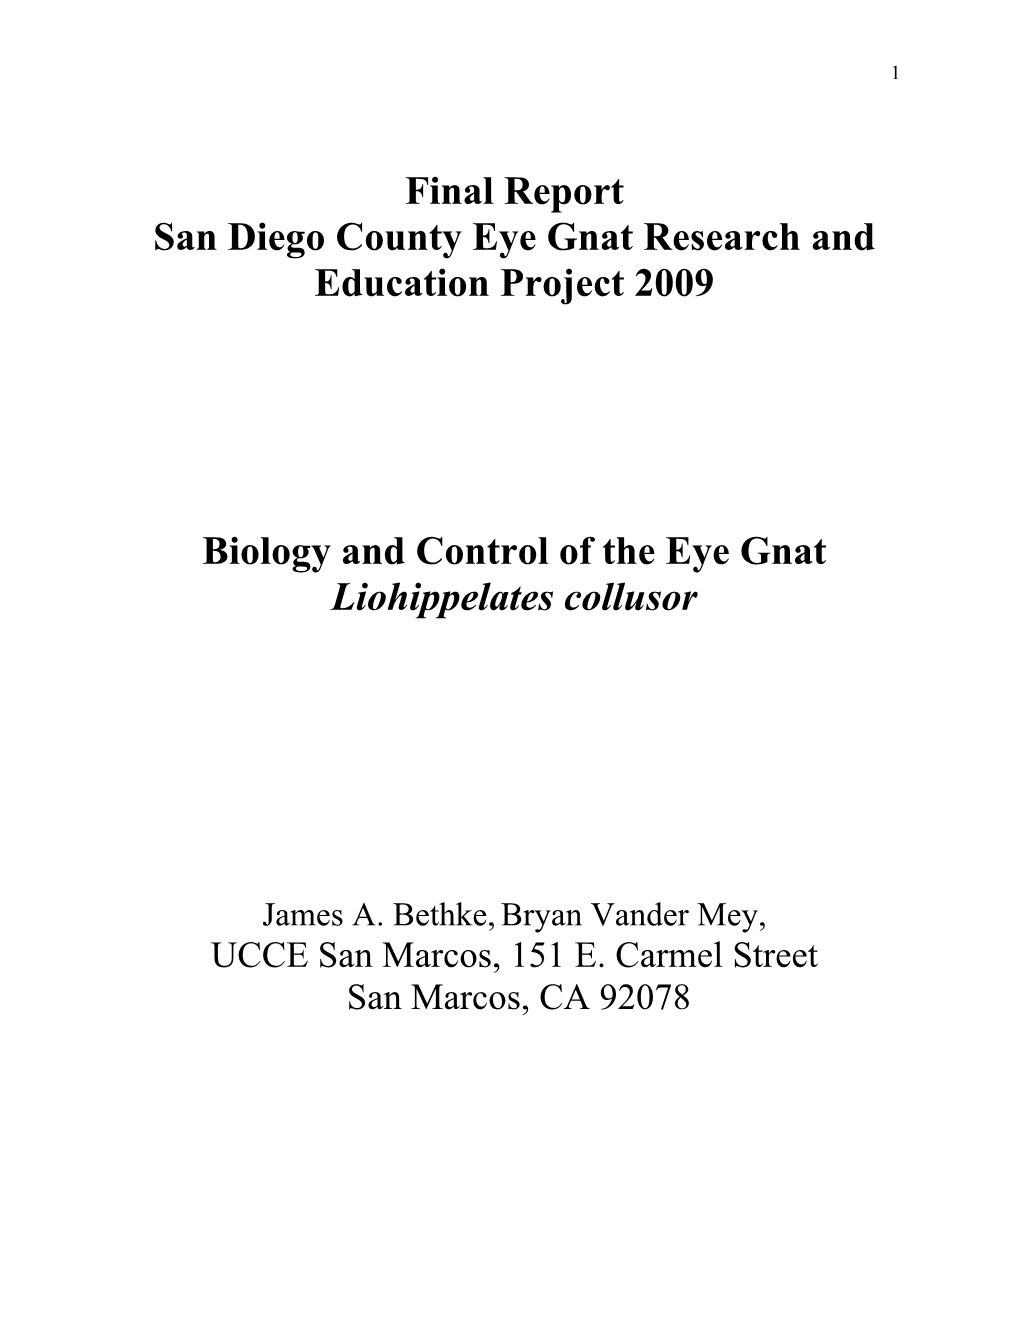 Final Report San Diego County Eye Gnat Research and Education Project 2009